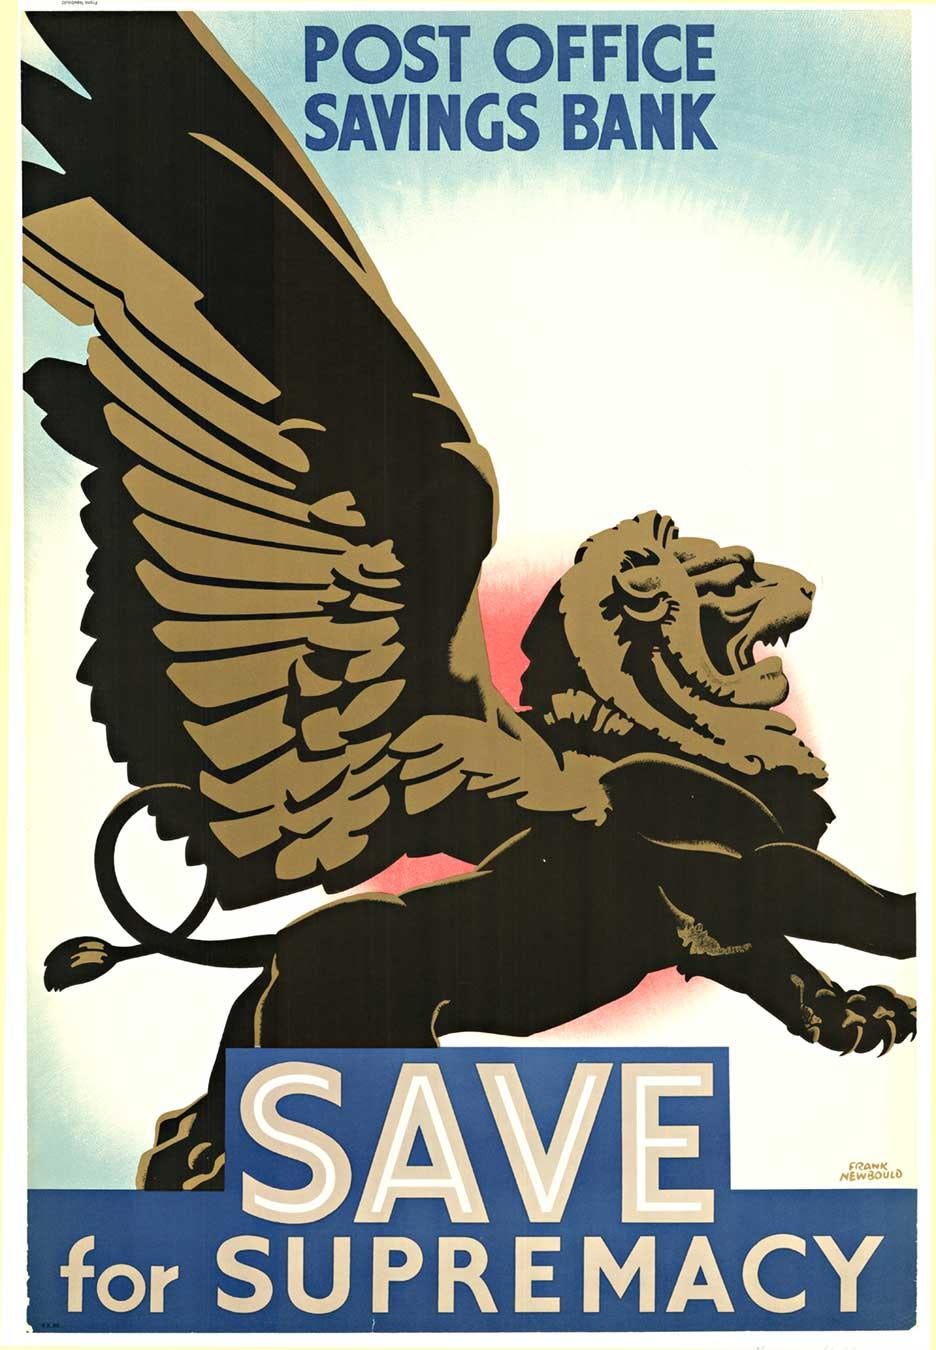 Vintage-Post Office Savings Bank, Save for Supremacy“, britisches Vintage-Posterplakat